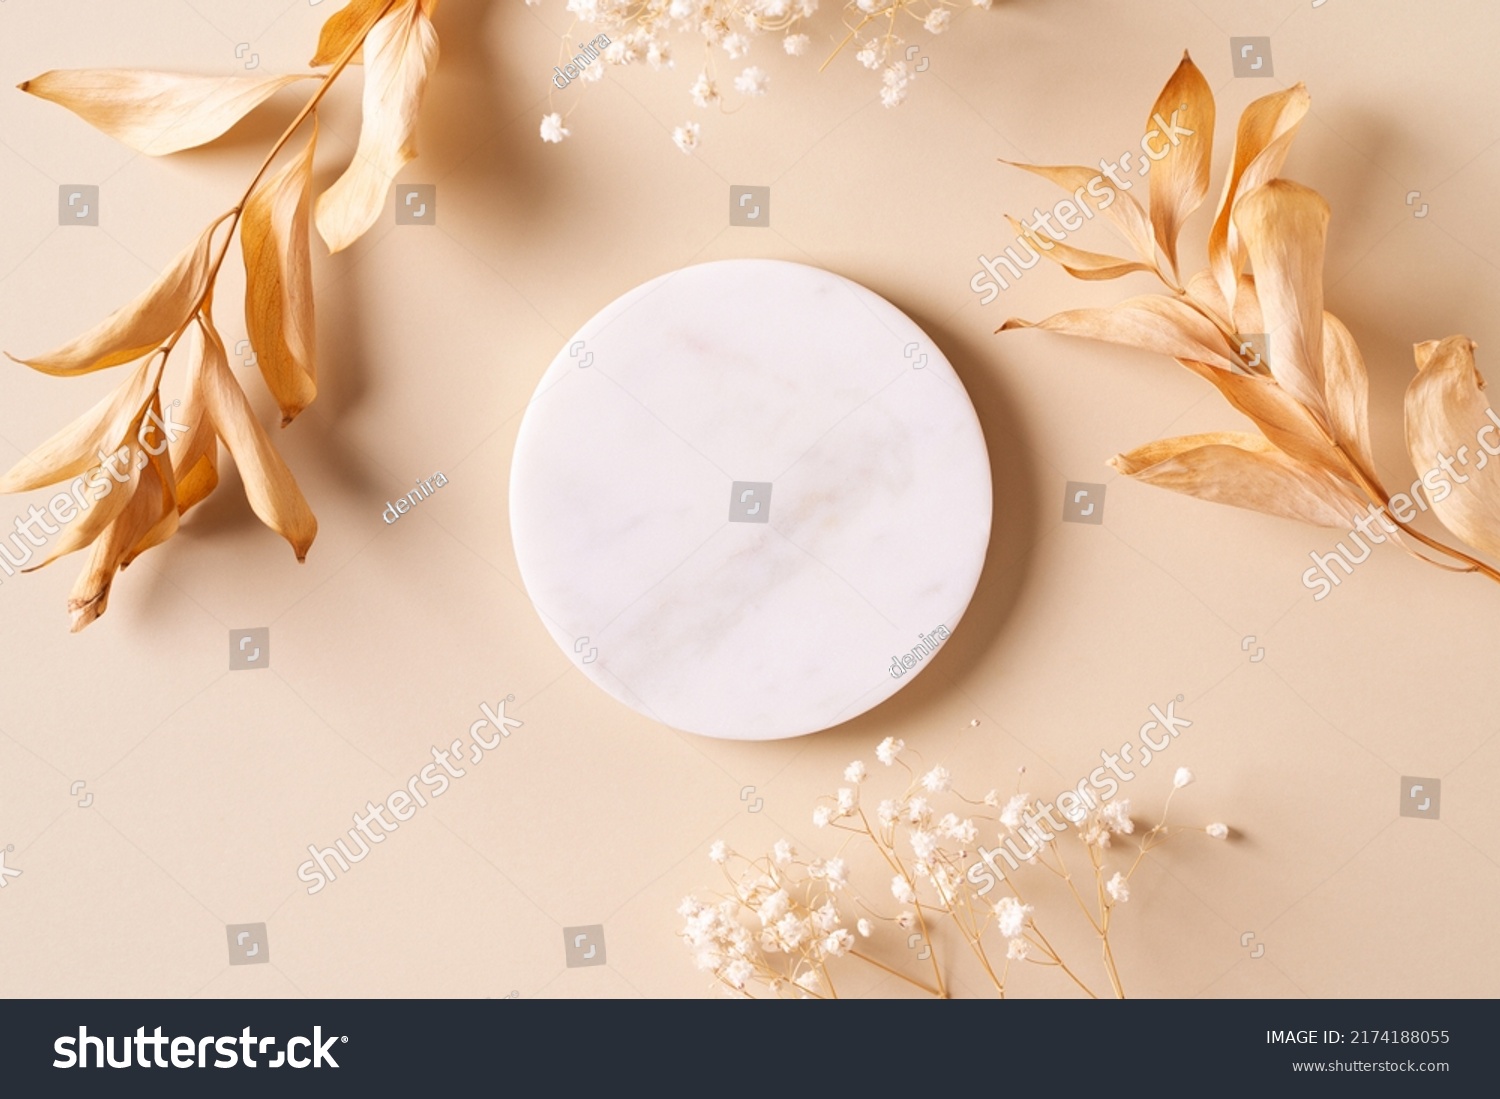 Dry natural grass, leaves and flowers frame with white marble podium, beauty and fashion concept mock up on beige background flat lay, top view, copy space #2174188055